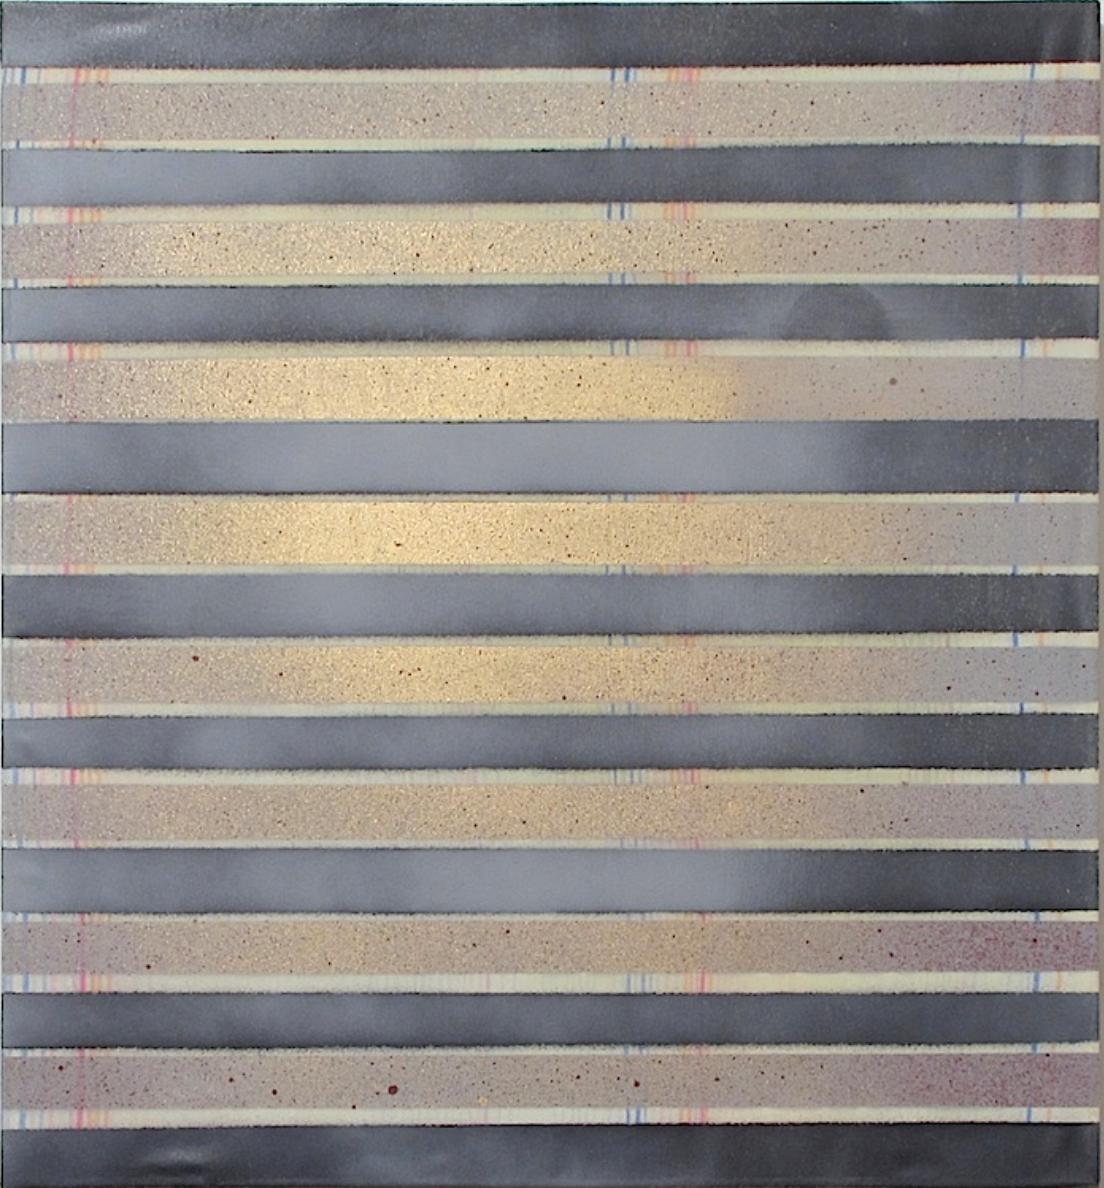 DEPARTURE - Mixed Media painting, black and metallic stripes,  - Mixed Media Art by Heather Hartman